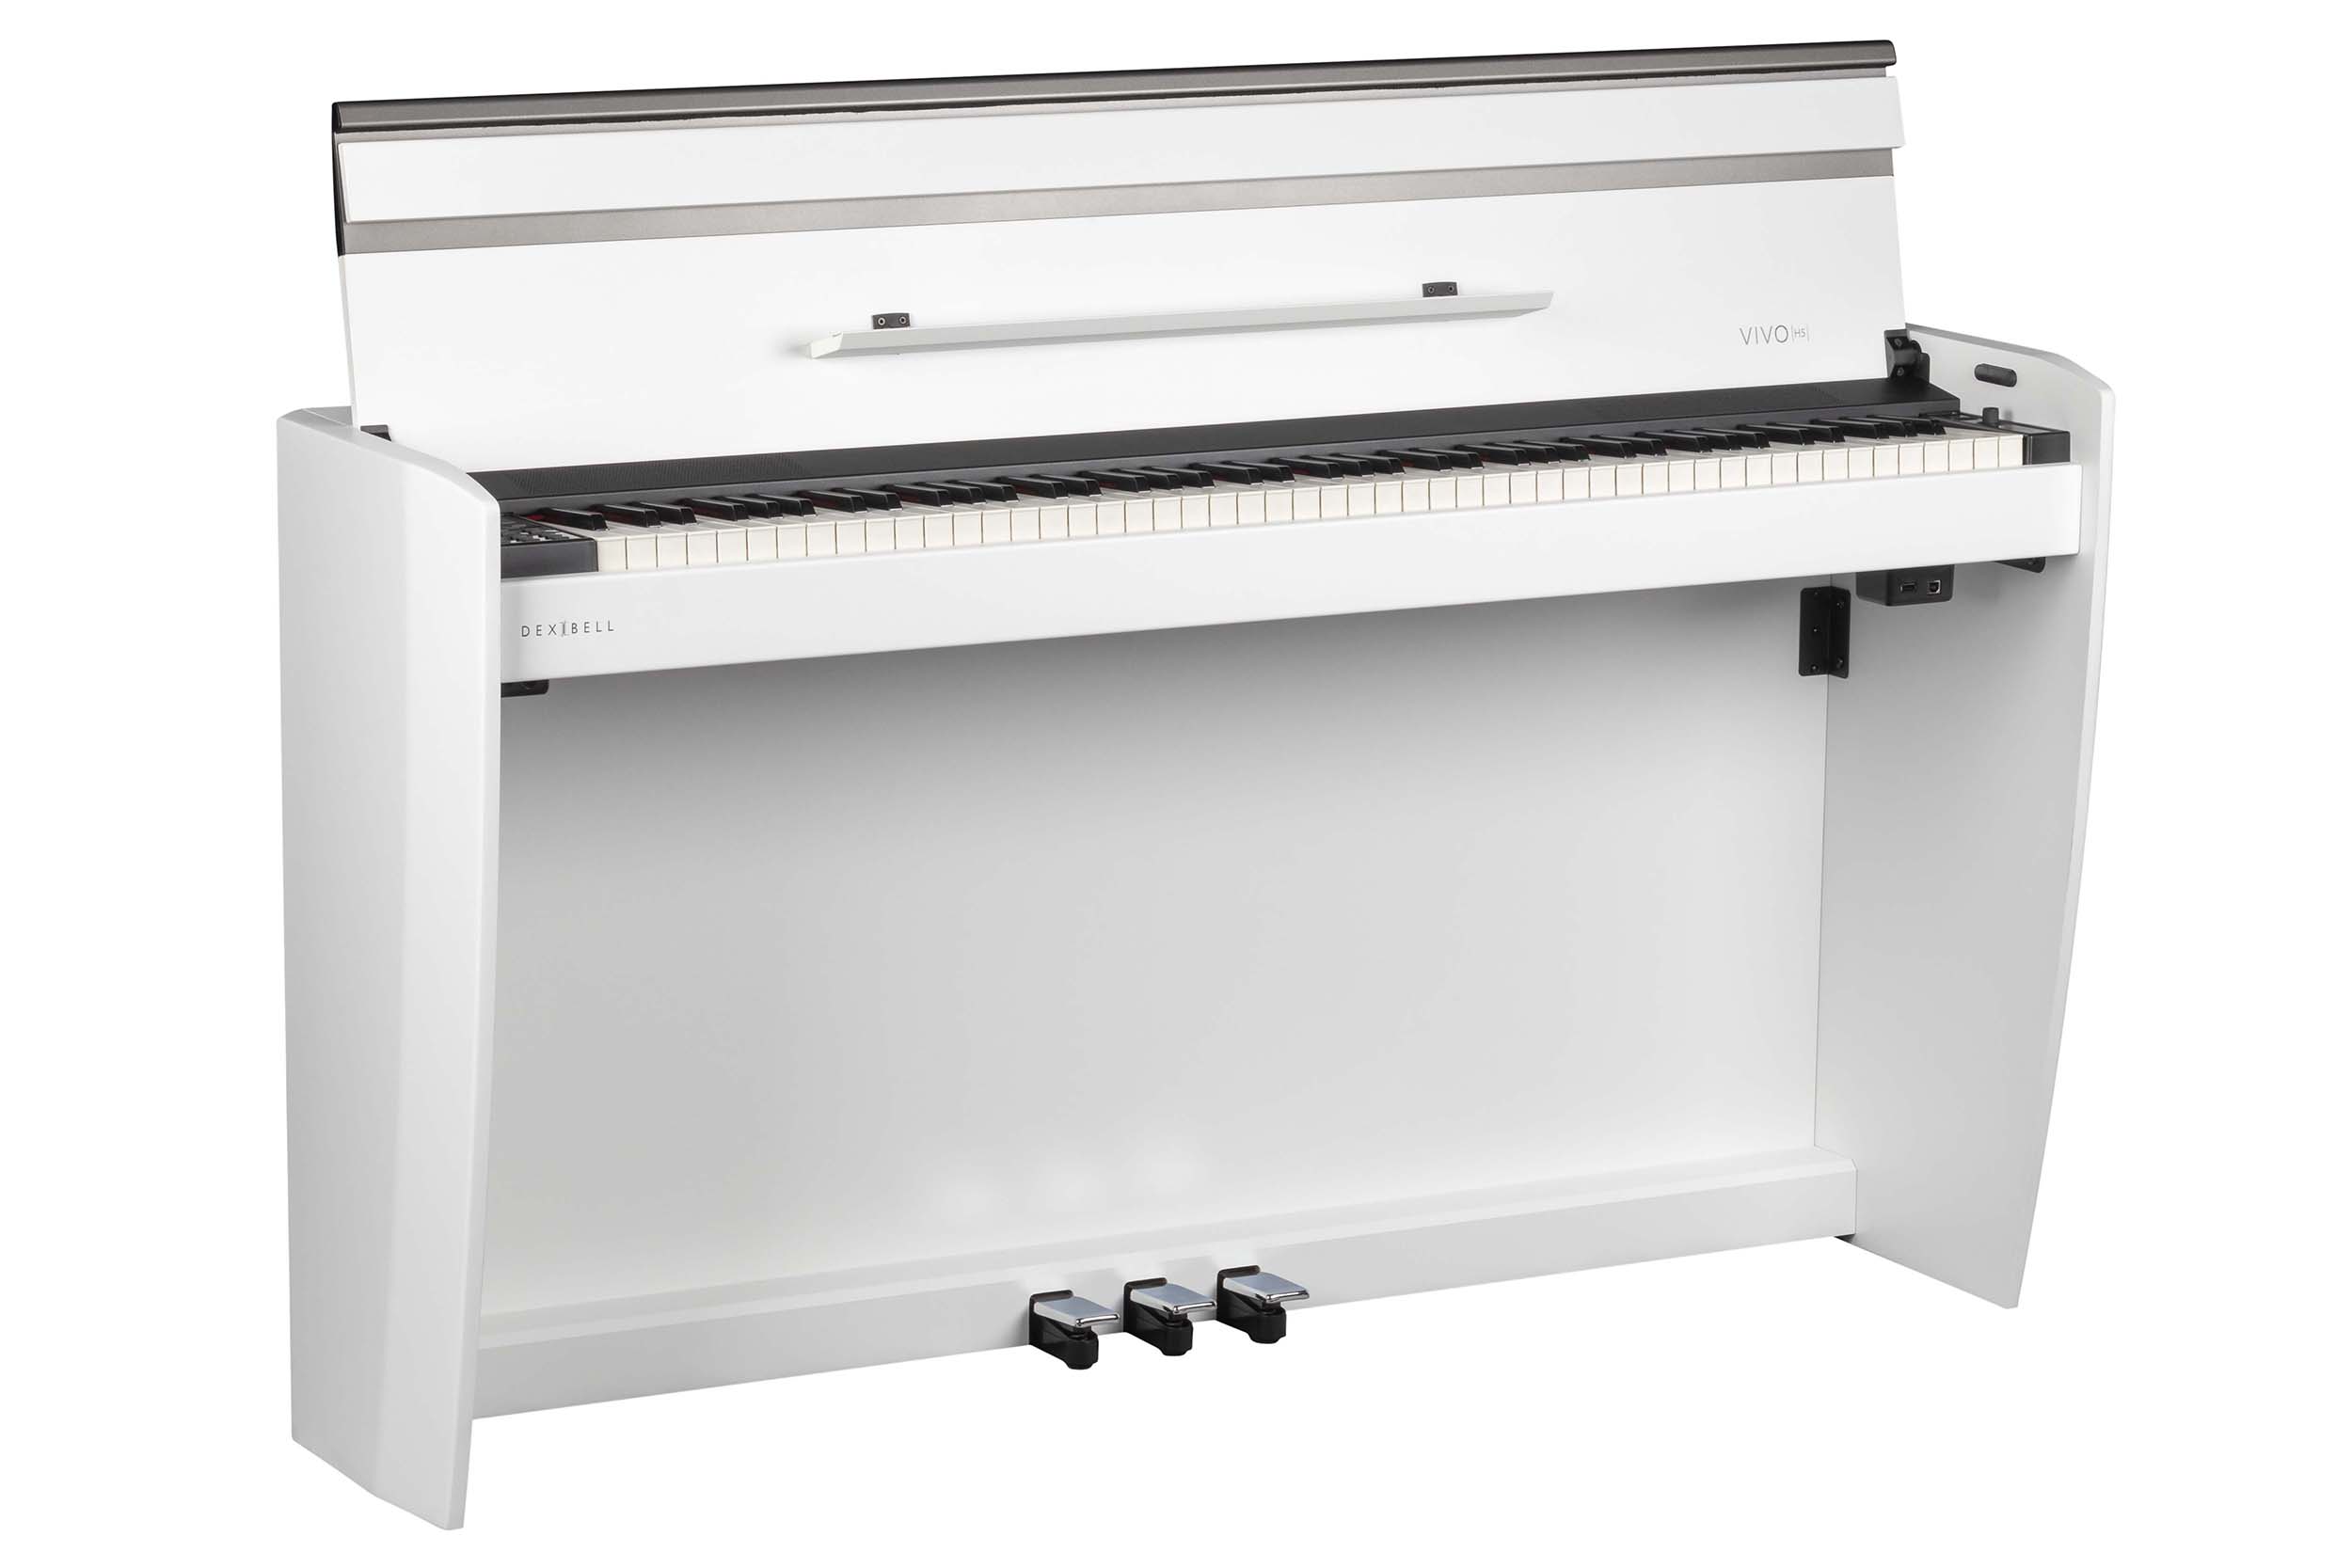 Dexibell Vivo H5 Wh - Digital piano with stand - Variation 1